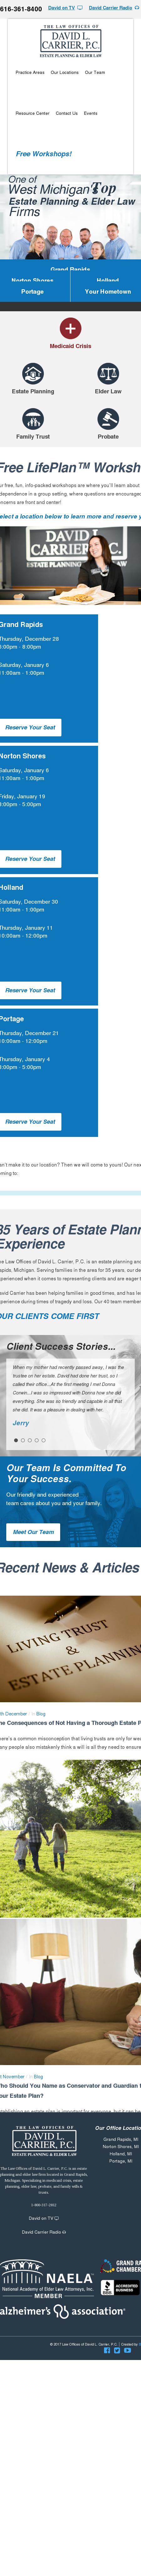 The Law Offices of David Carrier - Grand Rapids MI Lawyers